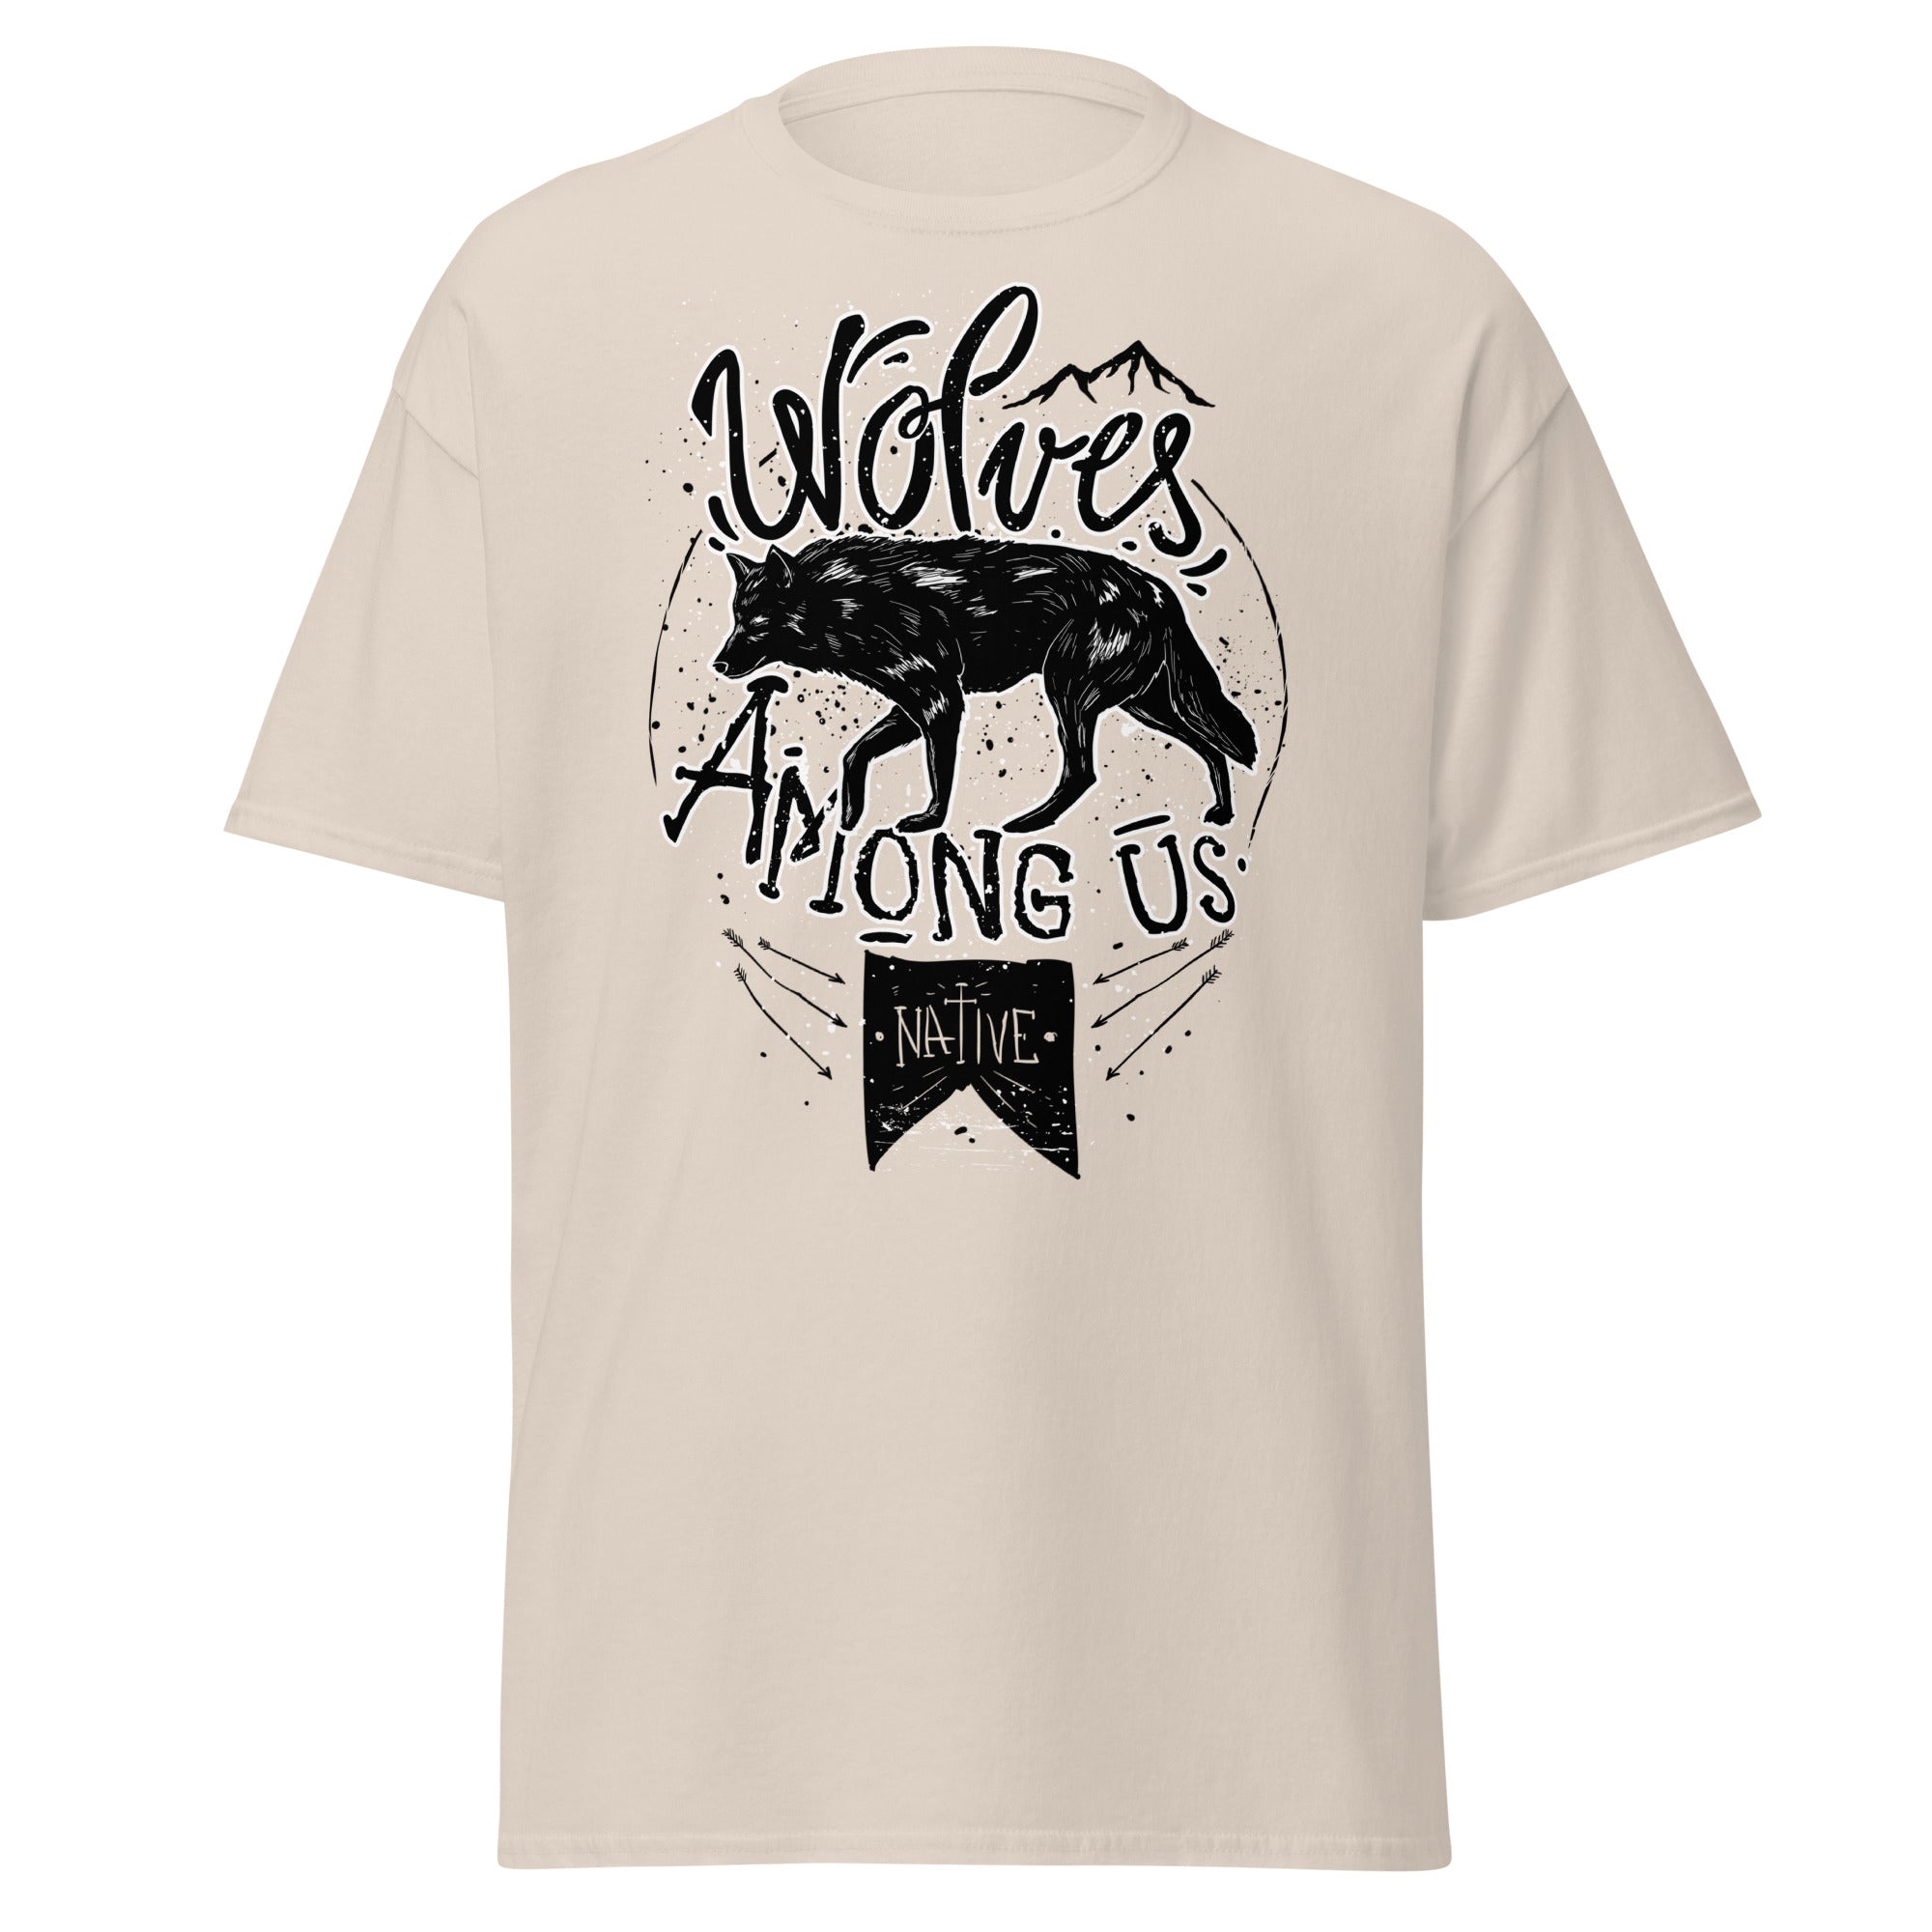 Wolves Among Us Mens Graphic Tee - Kicks Shoelaces